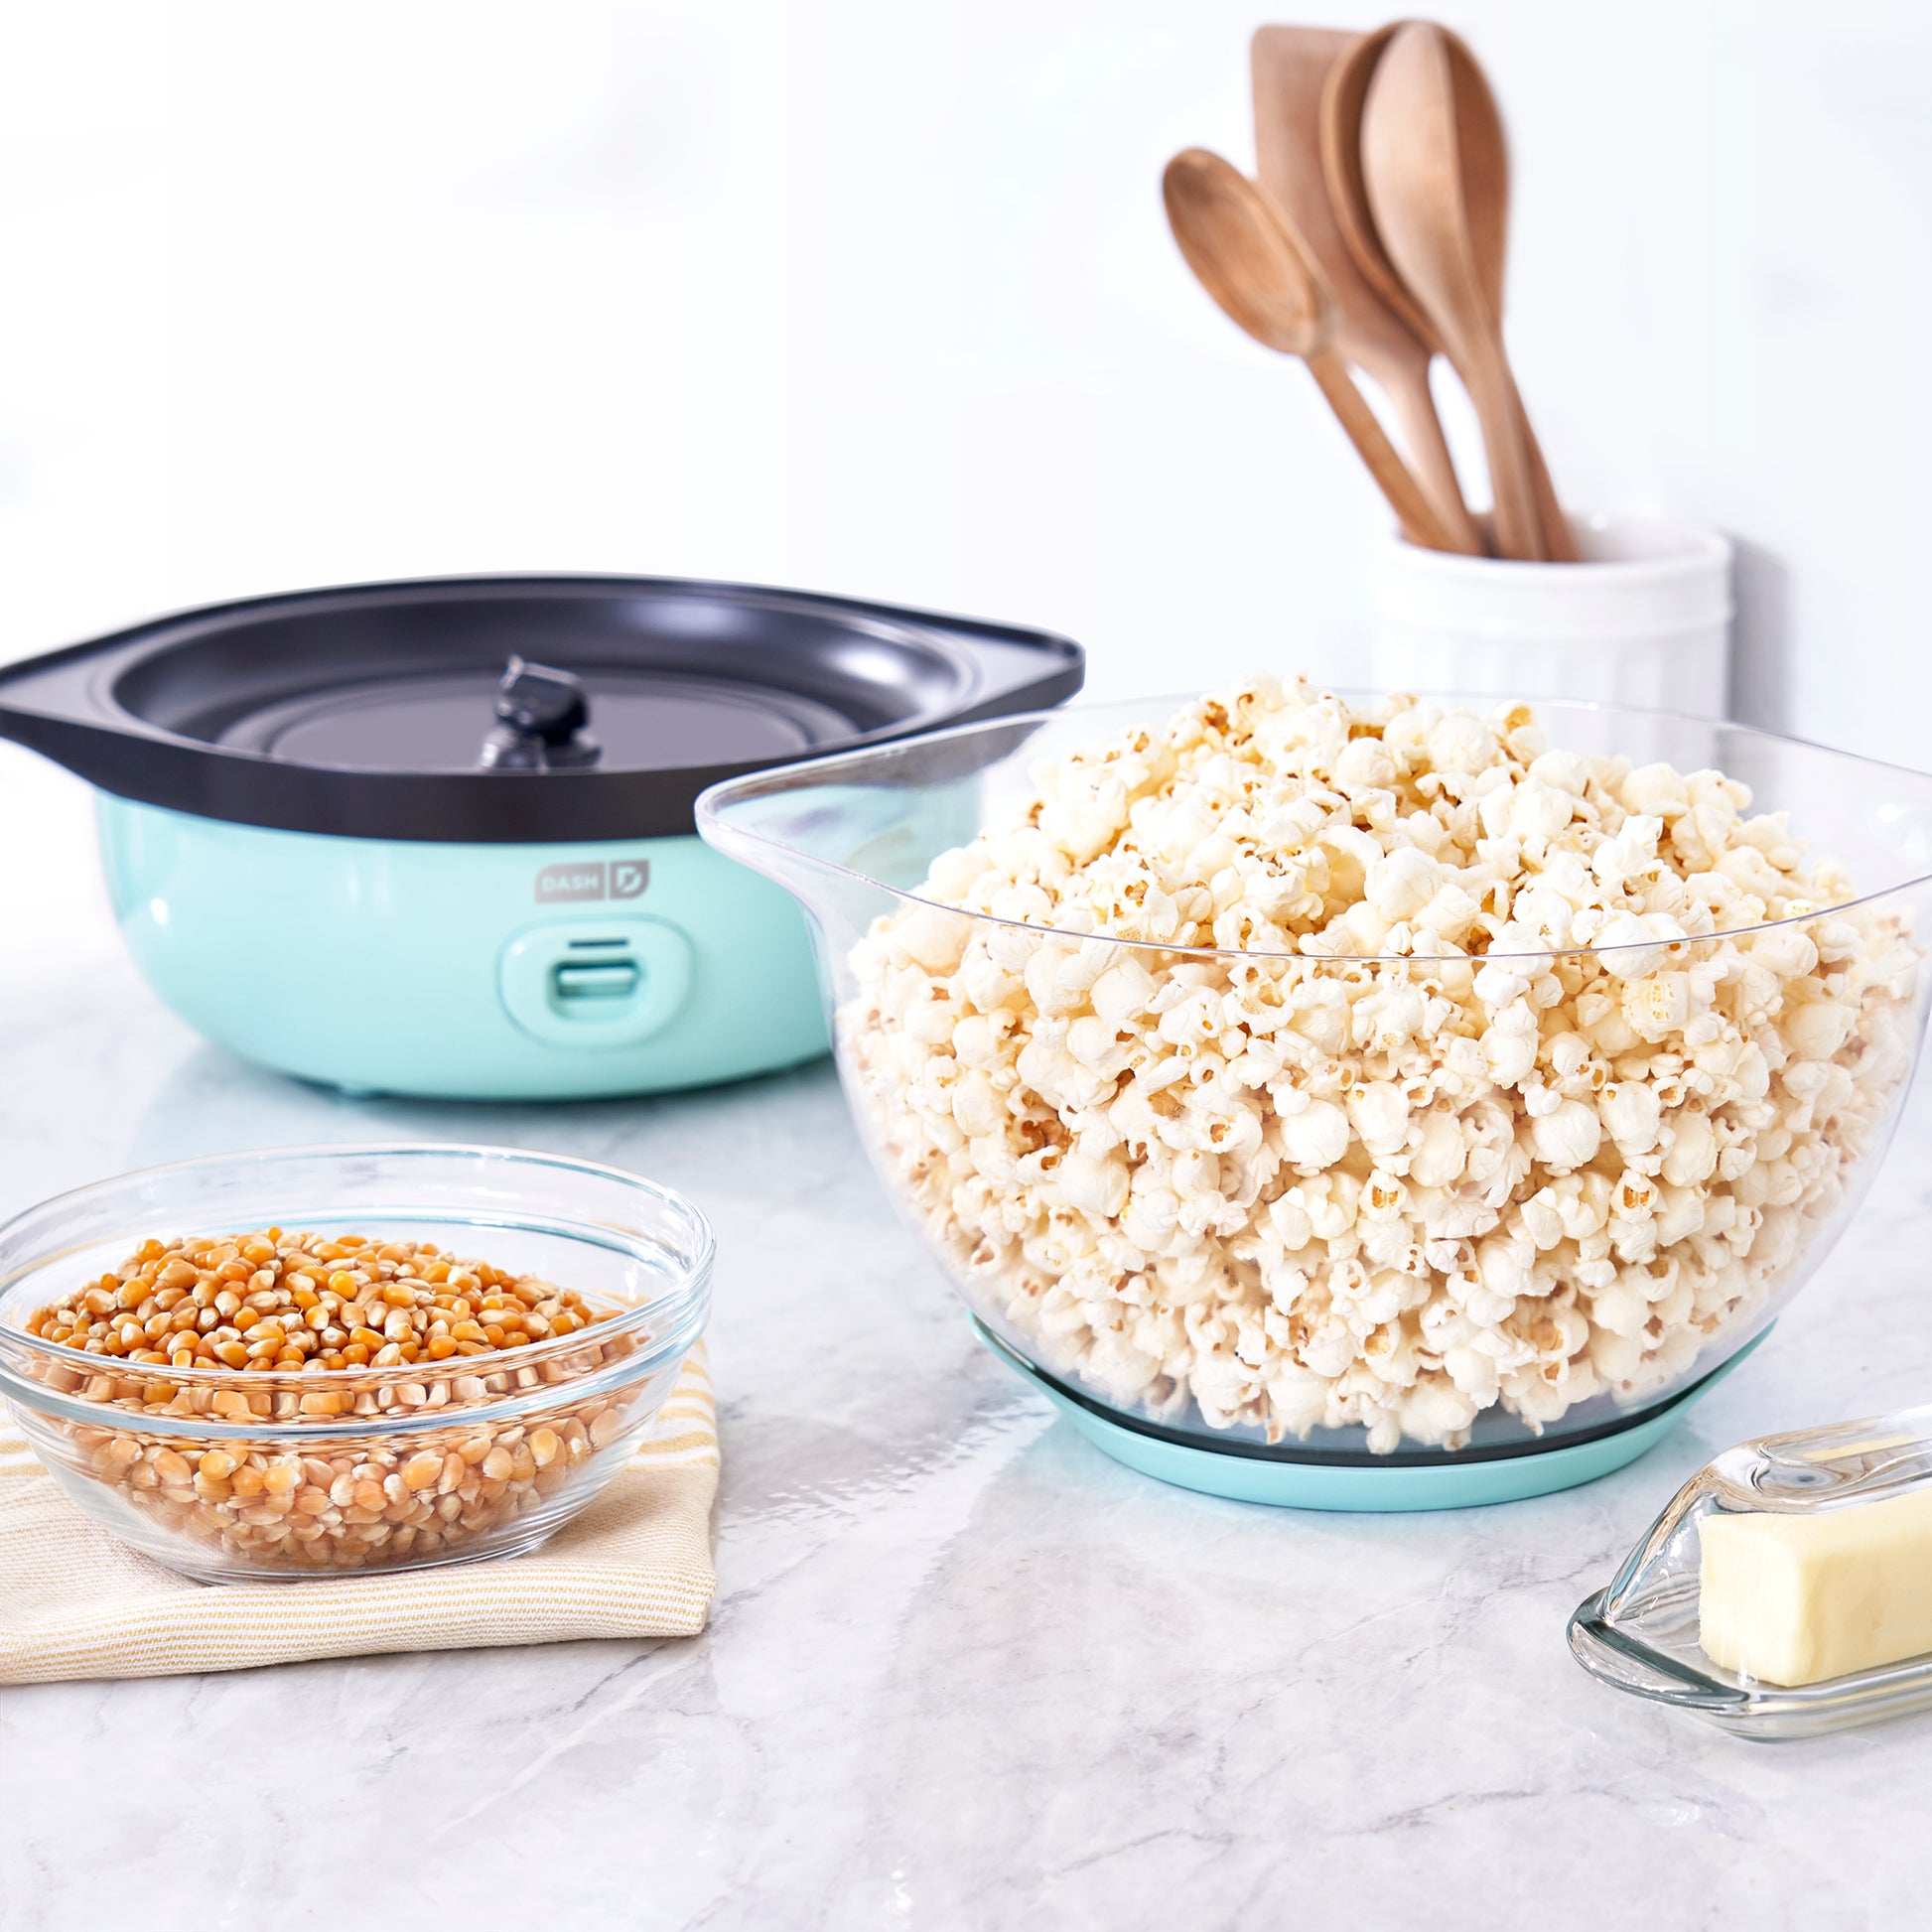 Dash Popcorn Maker Review: Movie Theater Snacks at Home